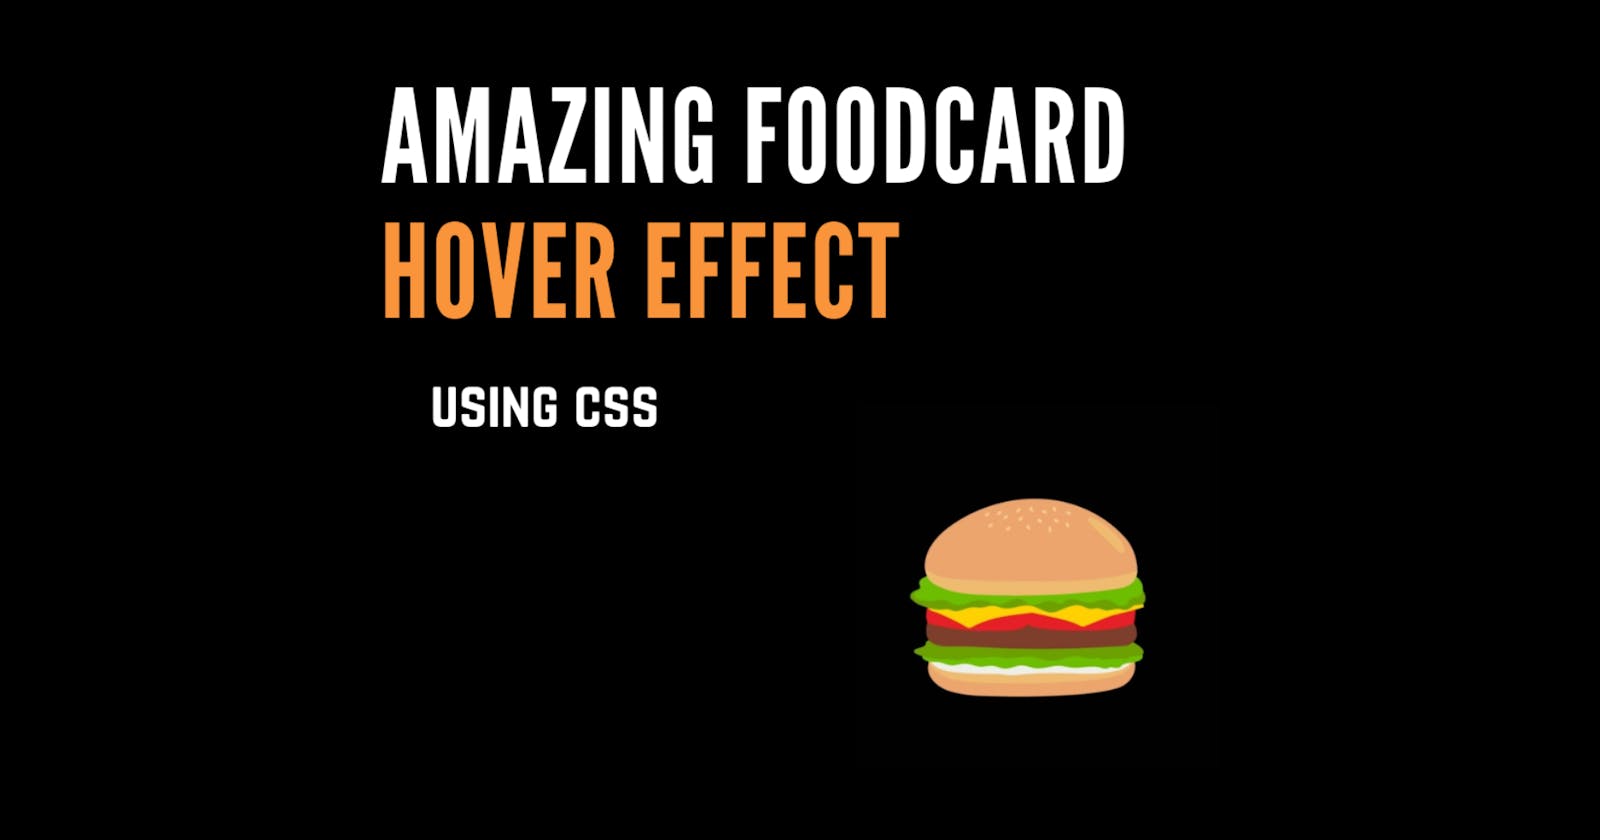 Amazing Food Card with Hover/Effect using CSS & HTML